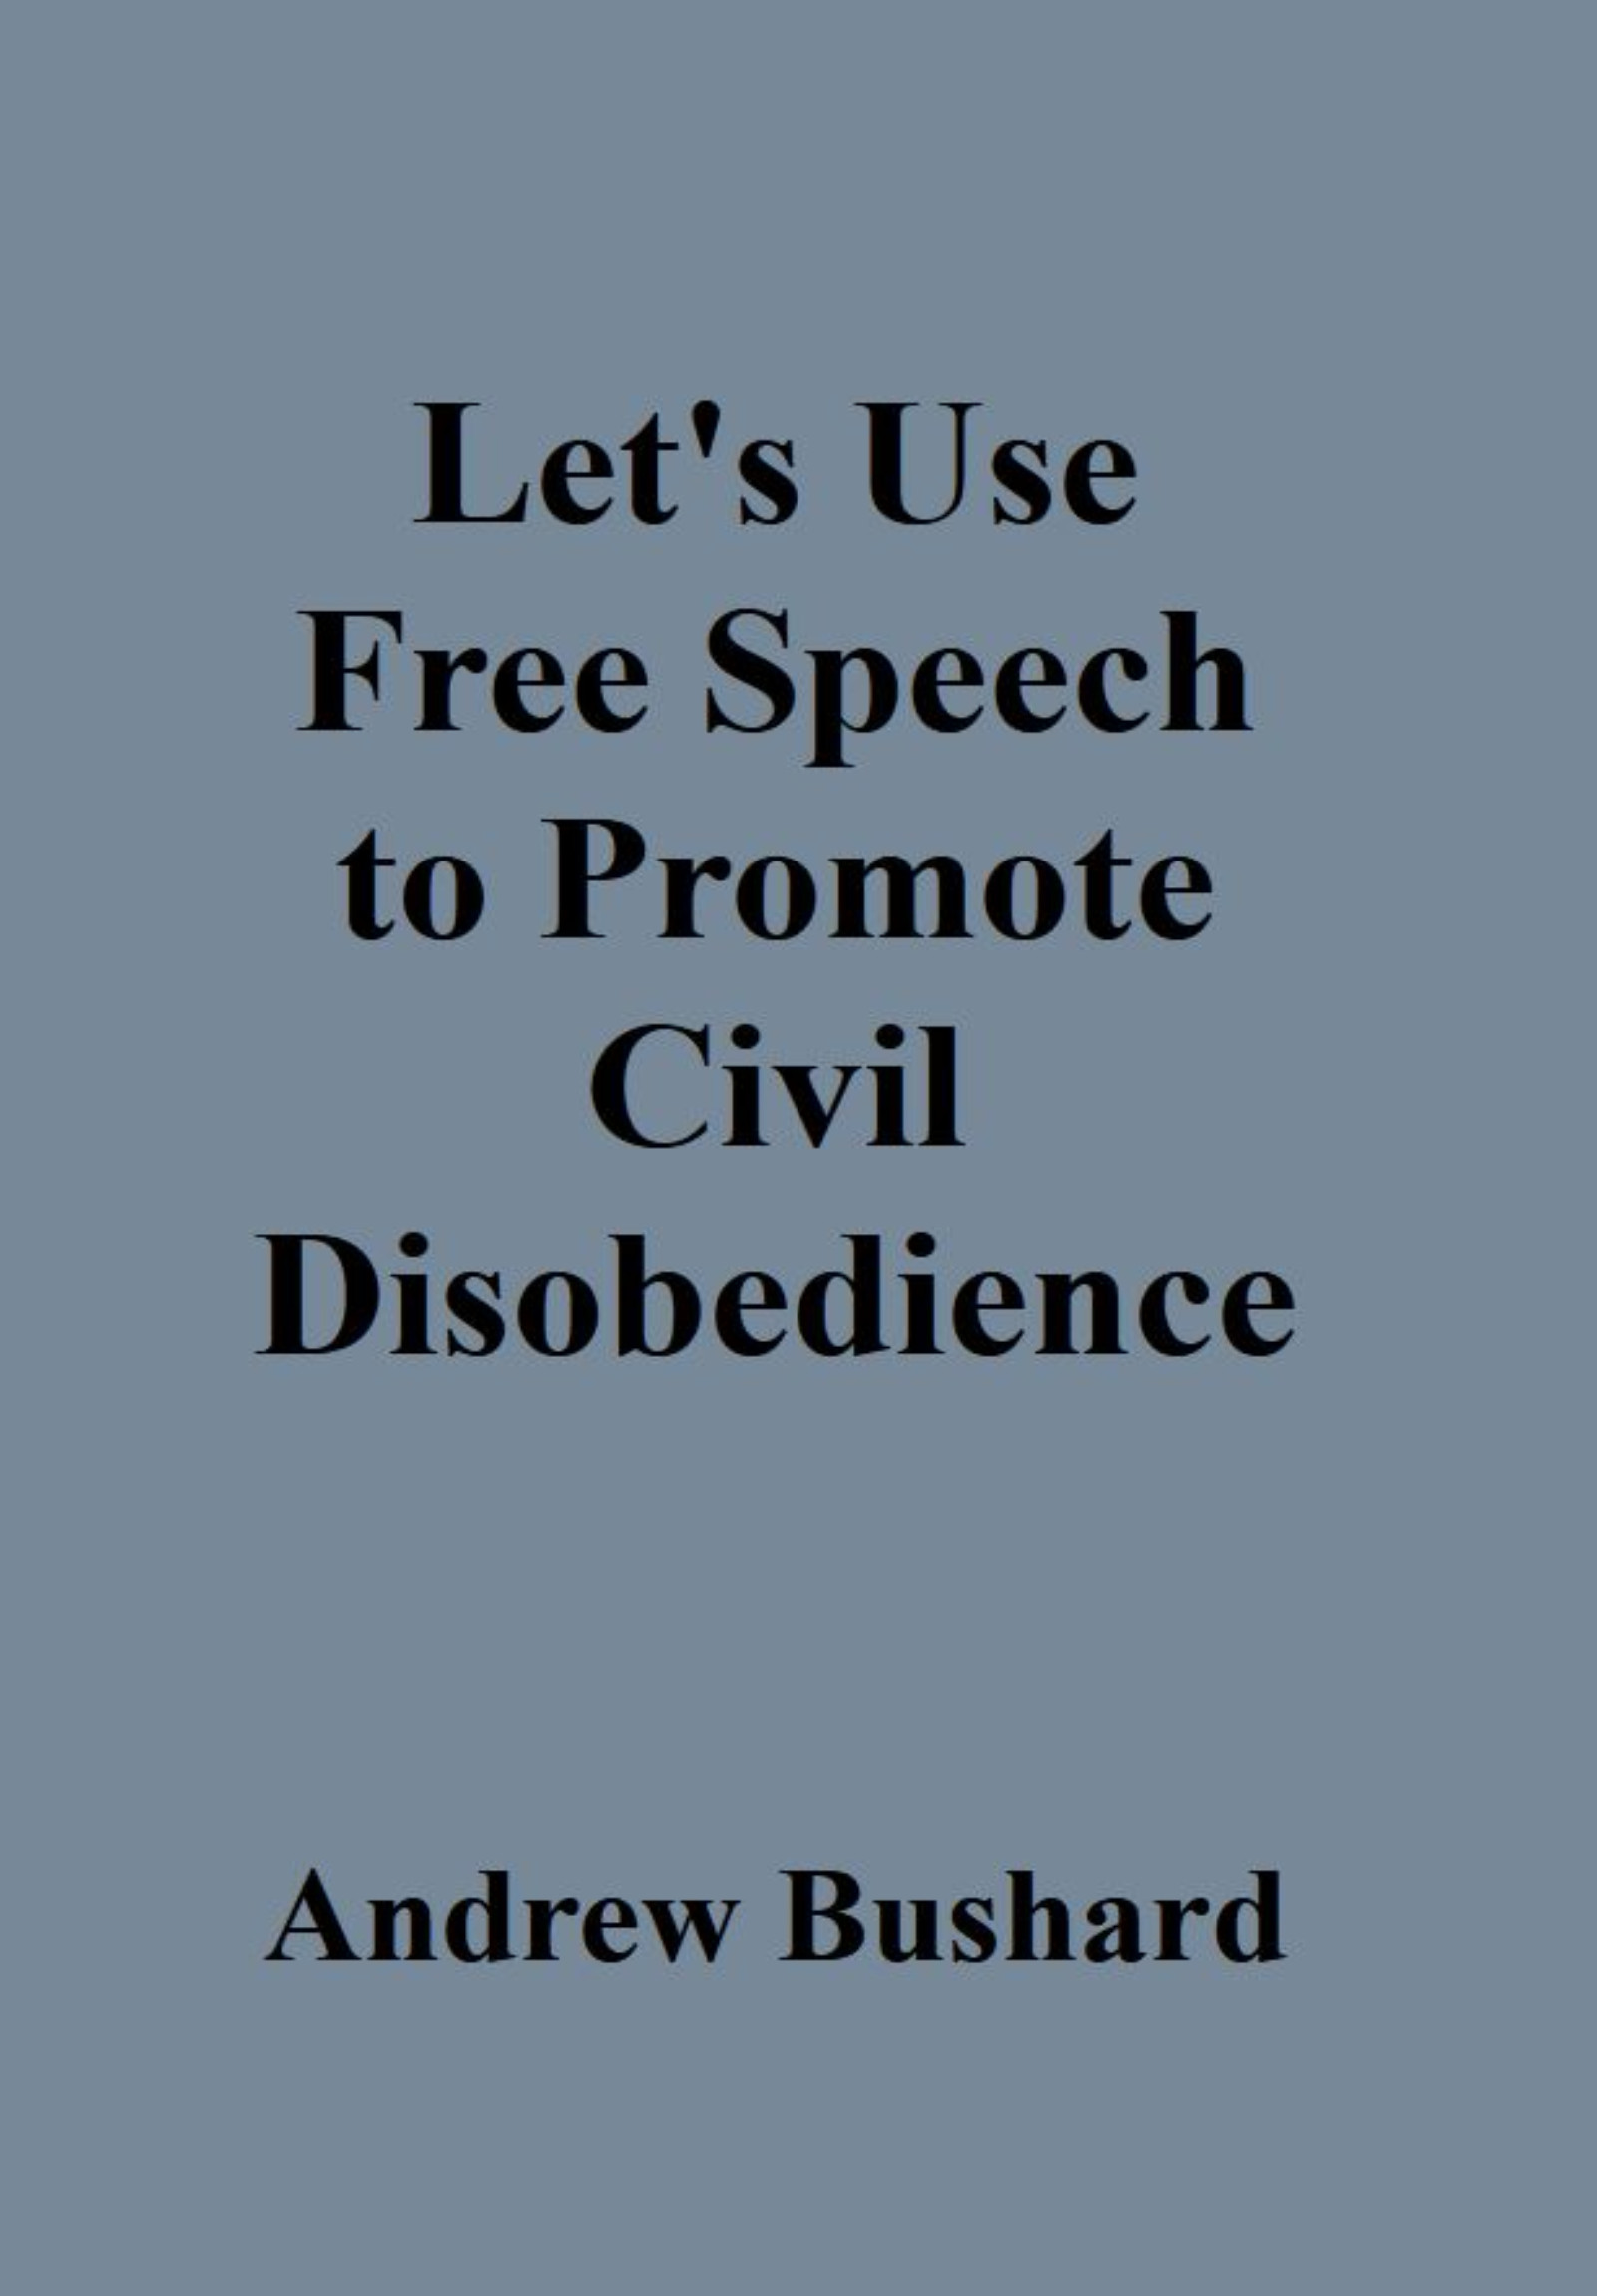 Let's Use Free Speech to Promote Civil Disobedience's featured image